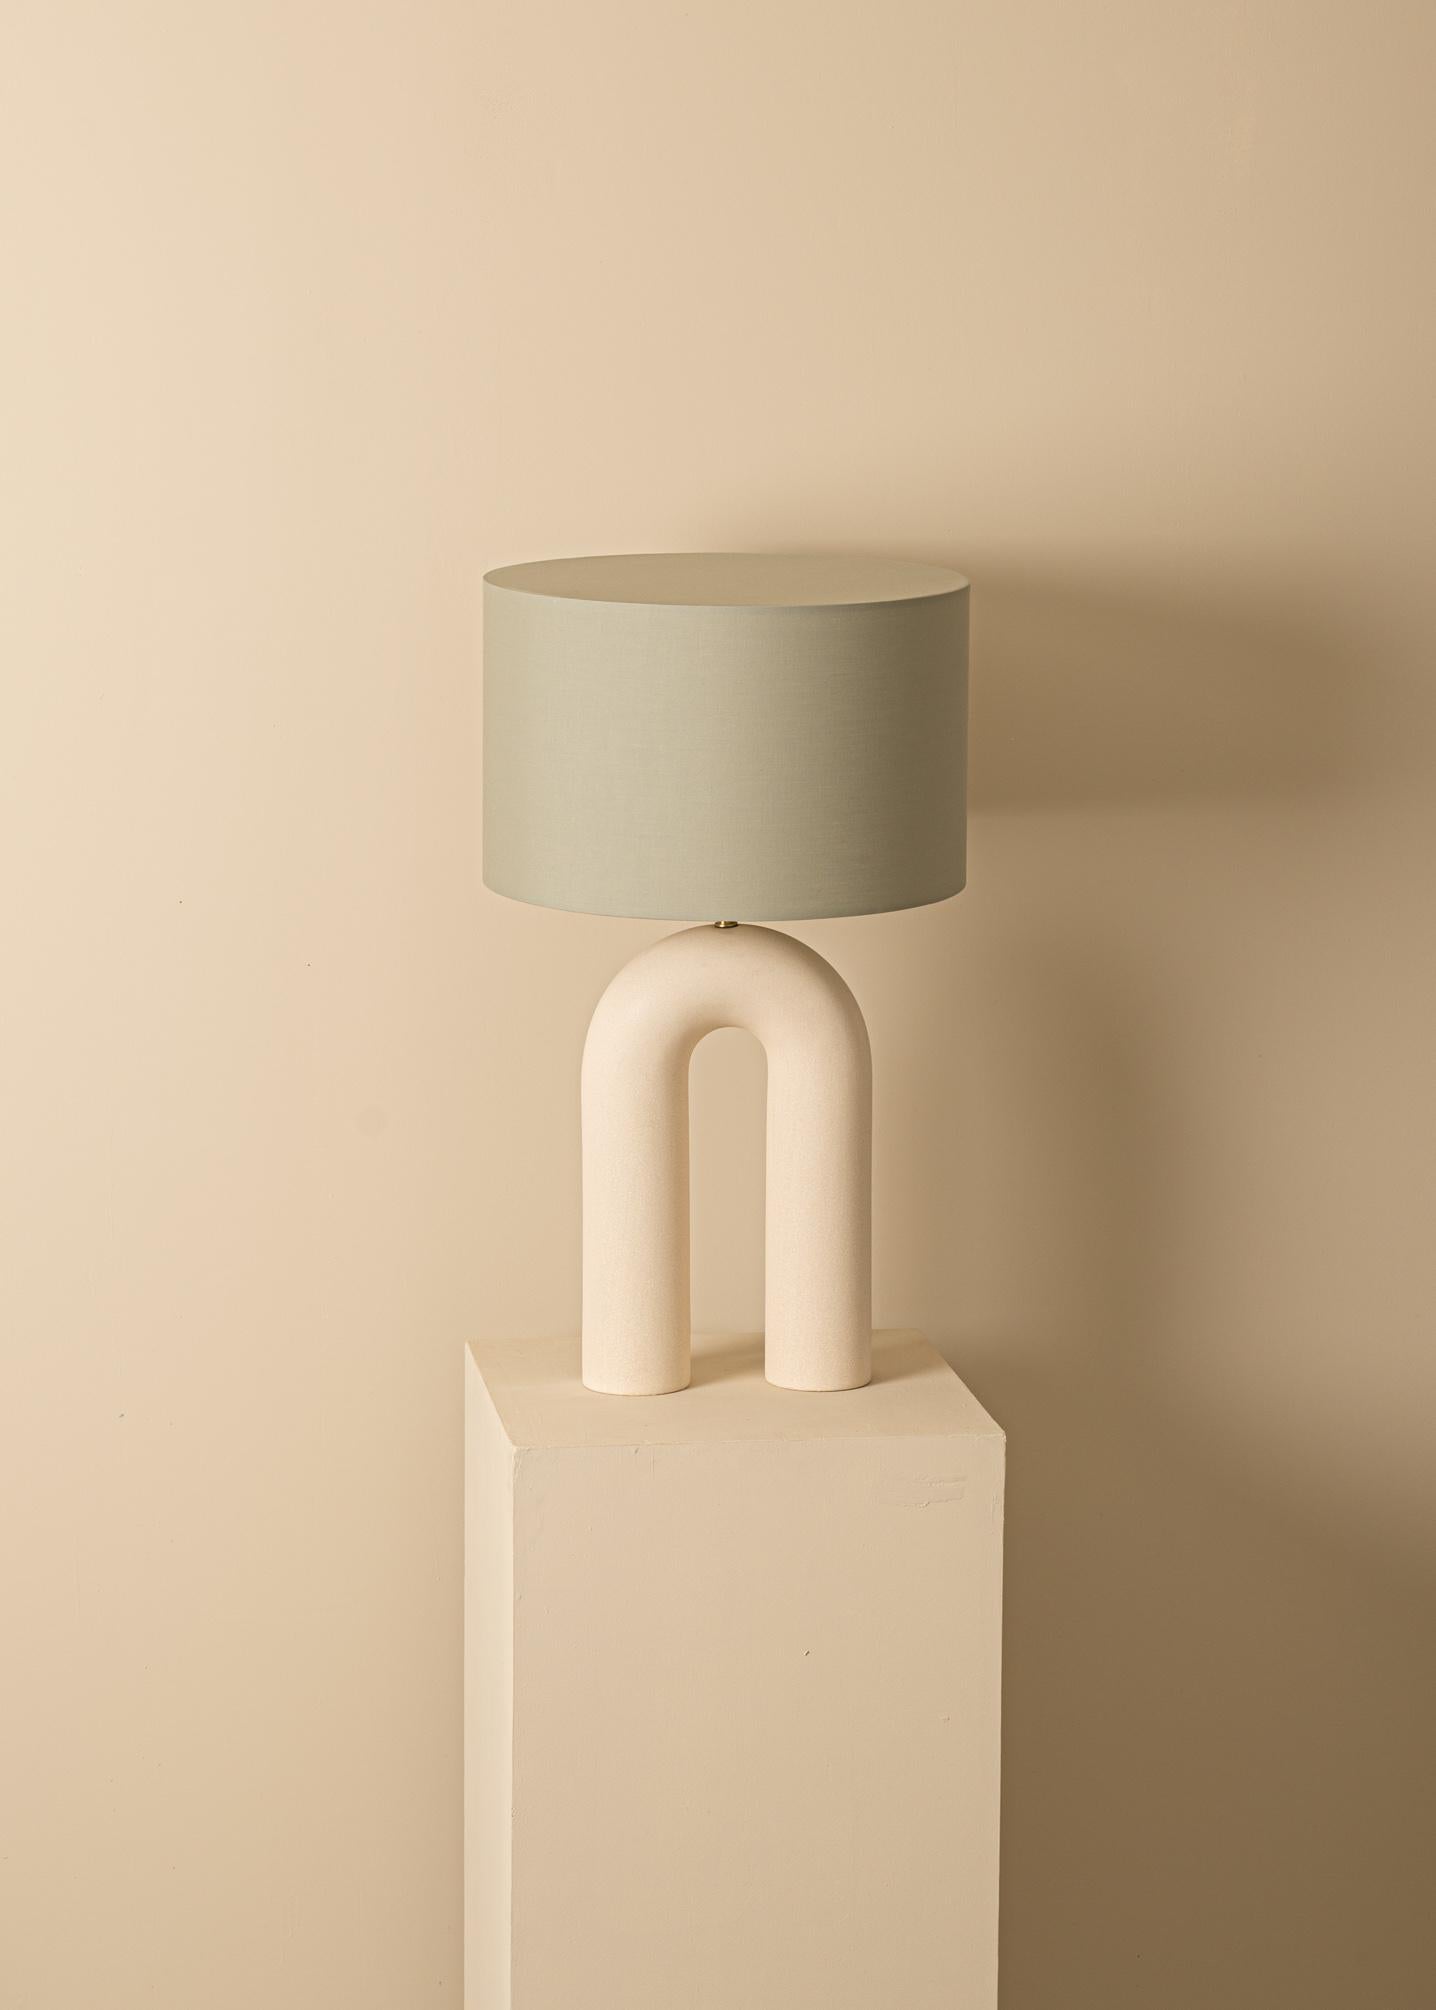 Ecru Ceramic Arko Table Lamp with Grey Olive Lampshade by Simone & Marcel
Dimensions: Ø 40 x H 67 cm.
Materials: Cotton lampshade and ceramic.

Also available in different marbles and ceramics. Custom options available on request. Please contact us.